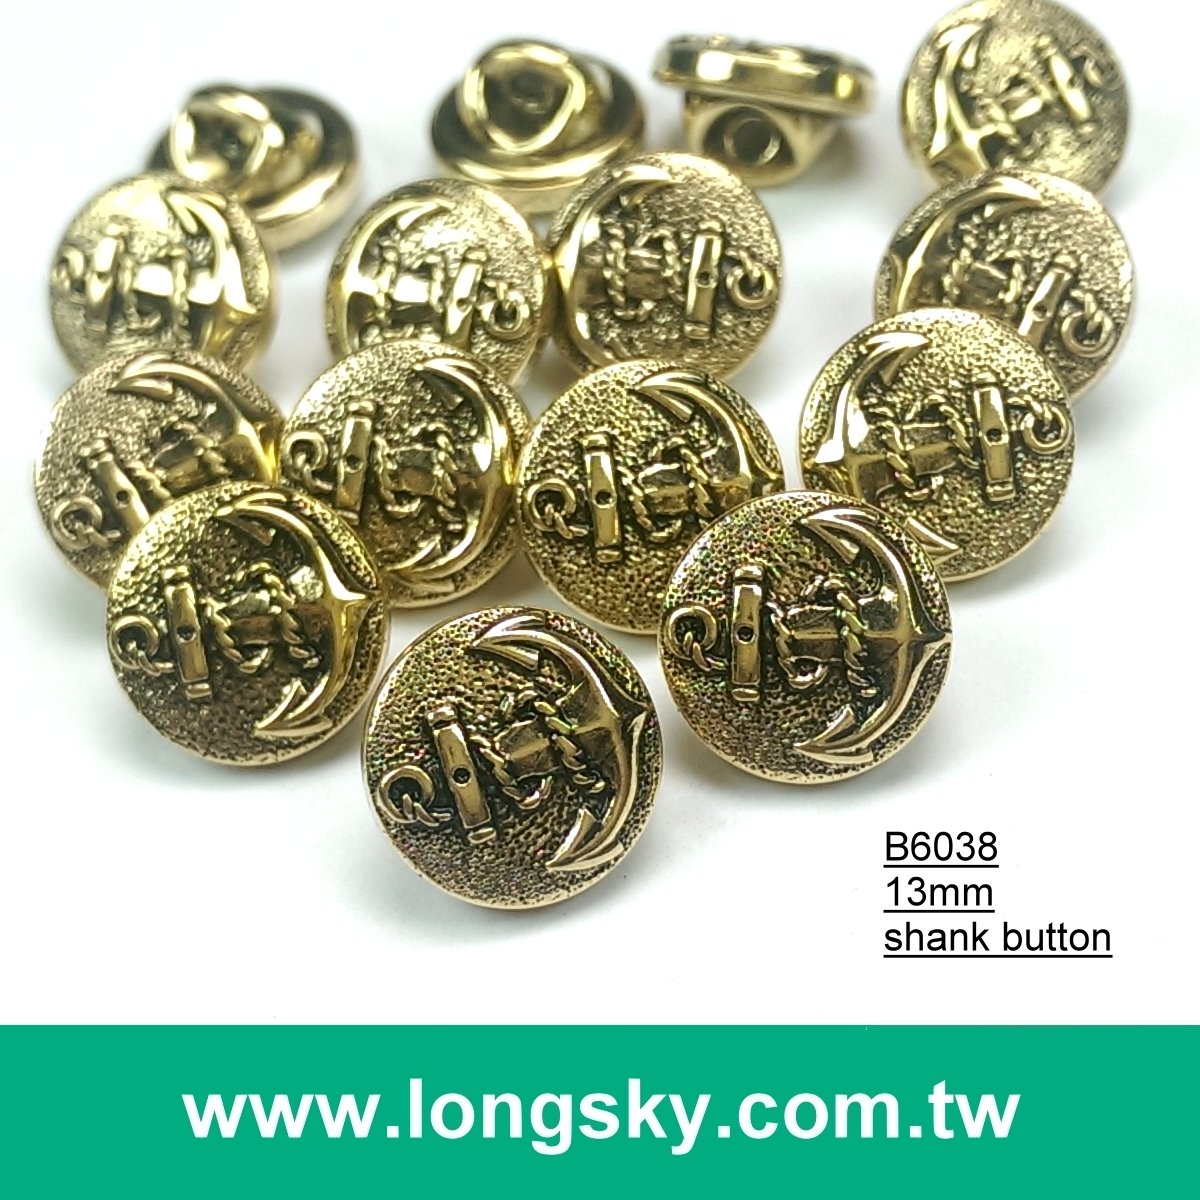 (#B6038/13mm) Sea anchor pattern on gold round button with shank for navy style garment